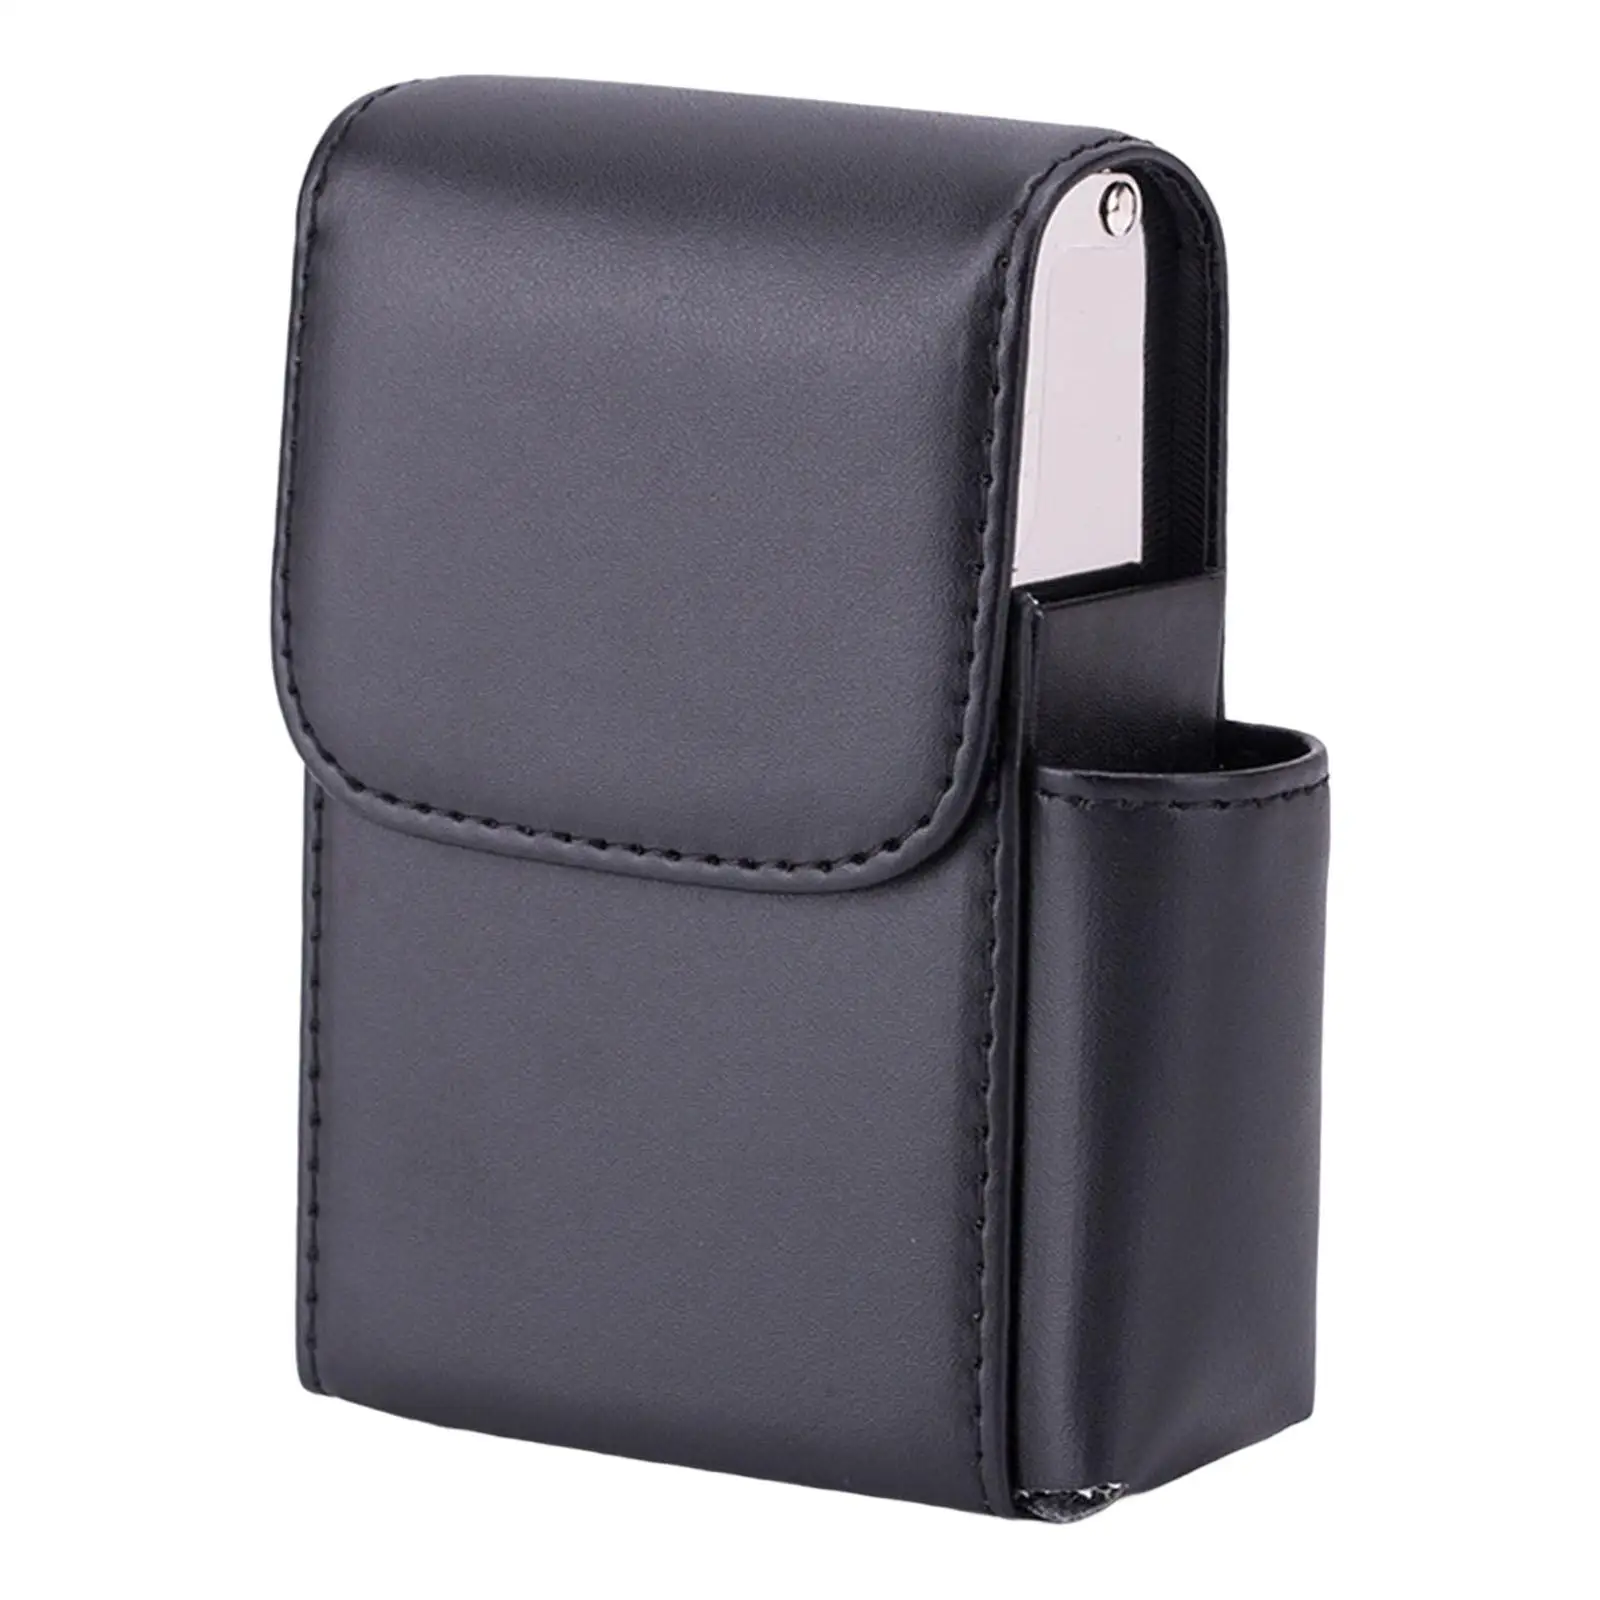 Cigarette Lighter Holder Case Hold 20 Cigarettes Tobacco Pouch Accessories Cigar Box for 20 Cigarettes Office Gifts Man Indoor